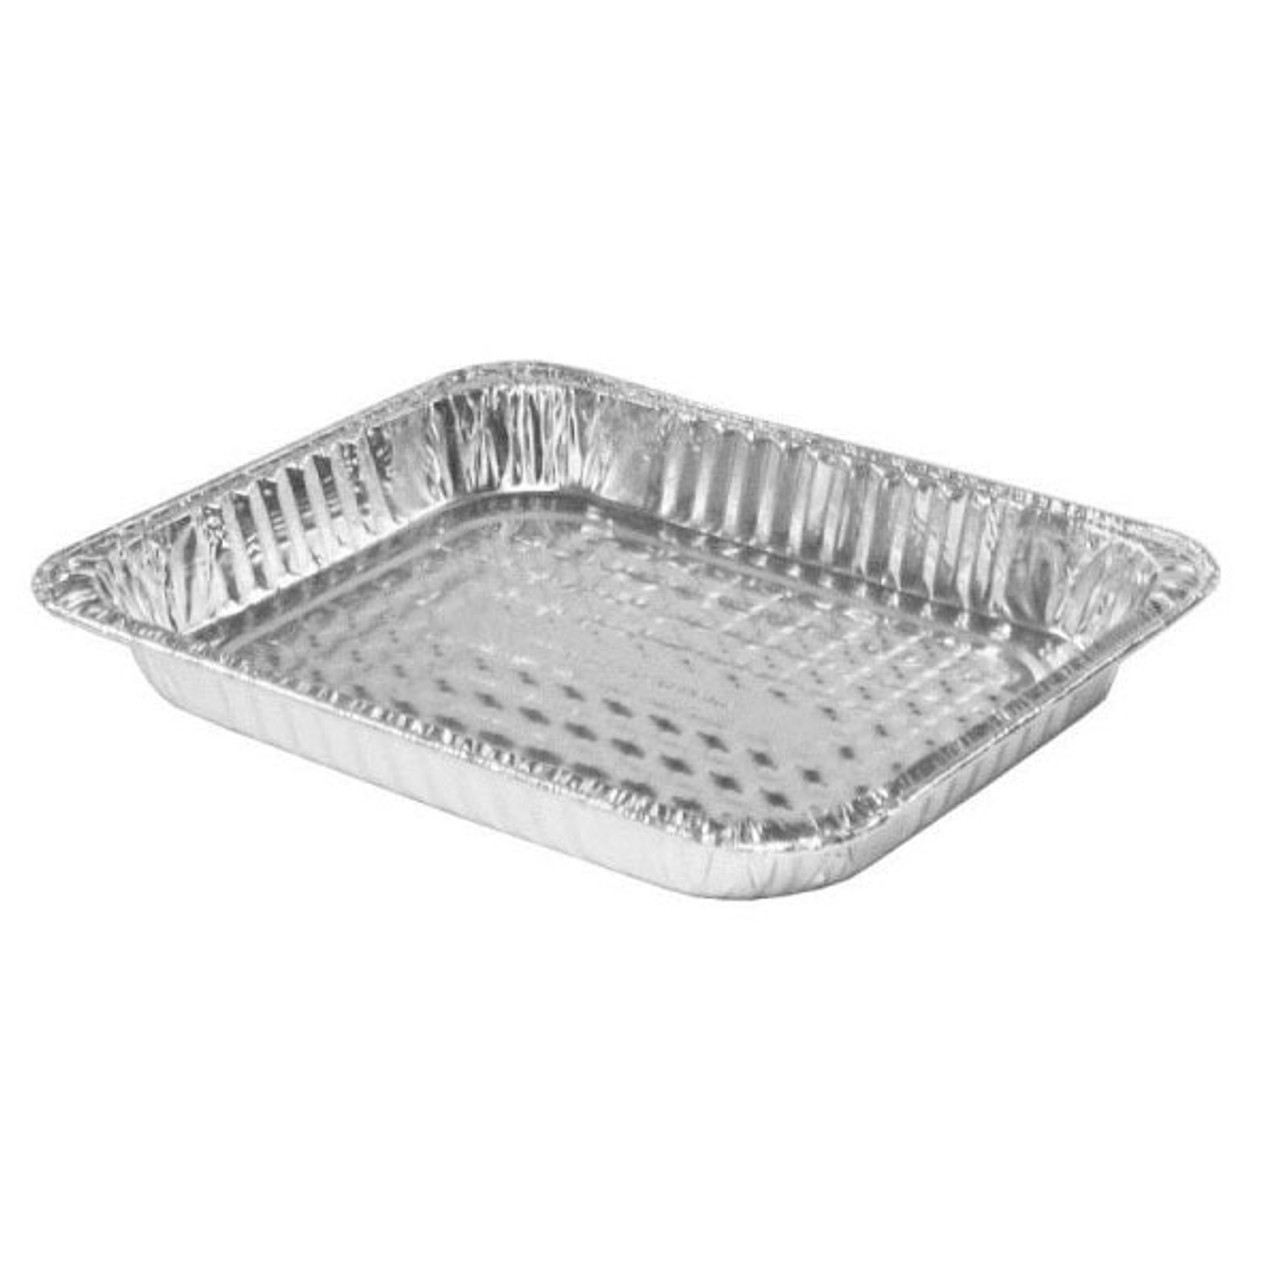 Handi-Foil Third 1/3 Size Deep Disposable Steam Table Aluminum Pan Tray  -(Pack of 50)